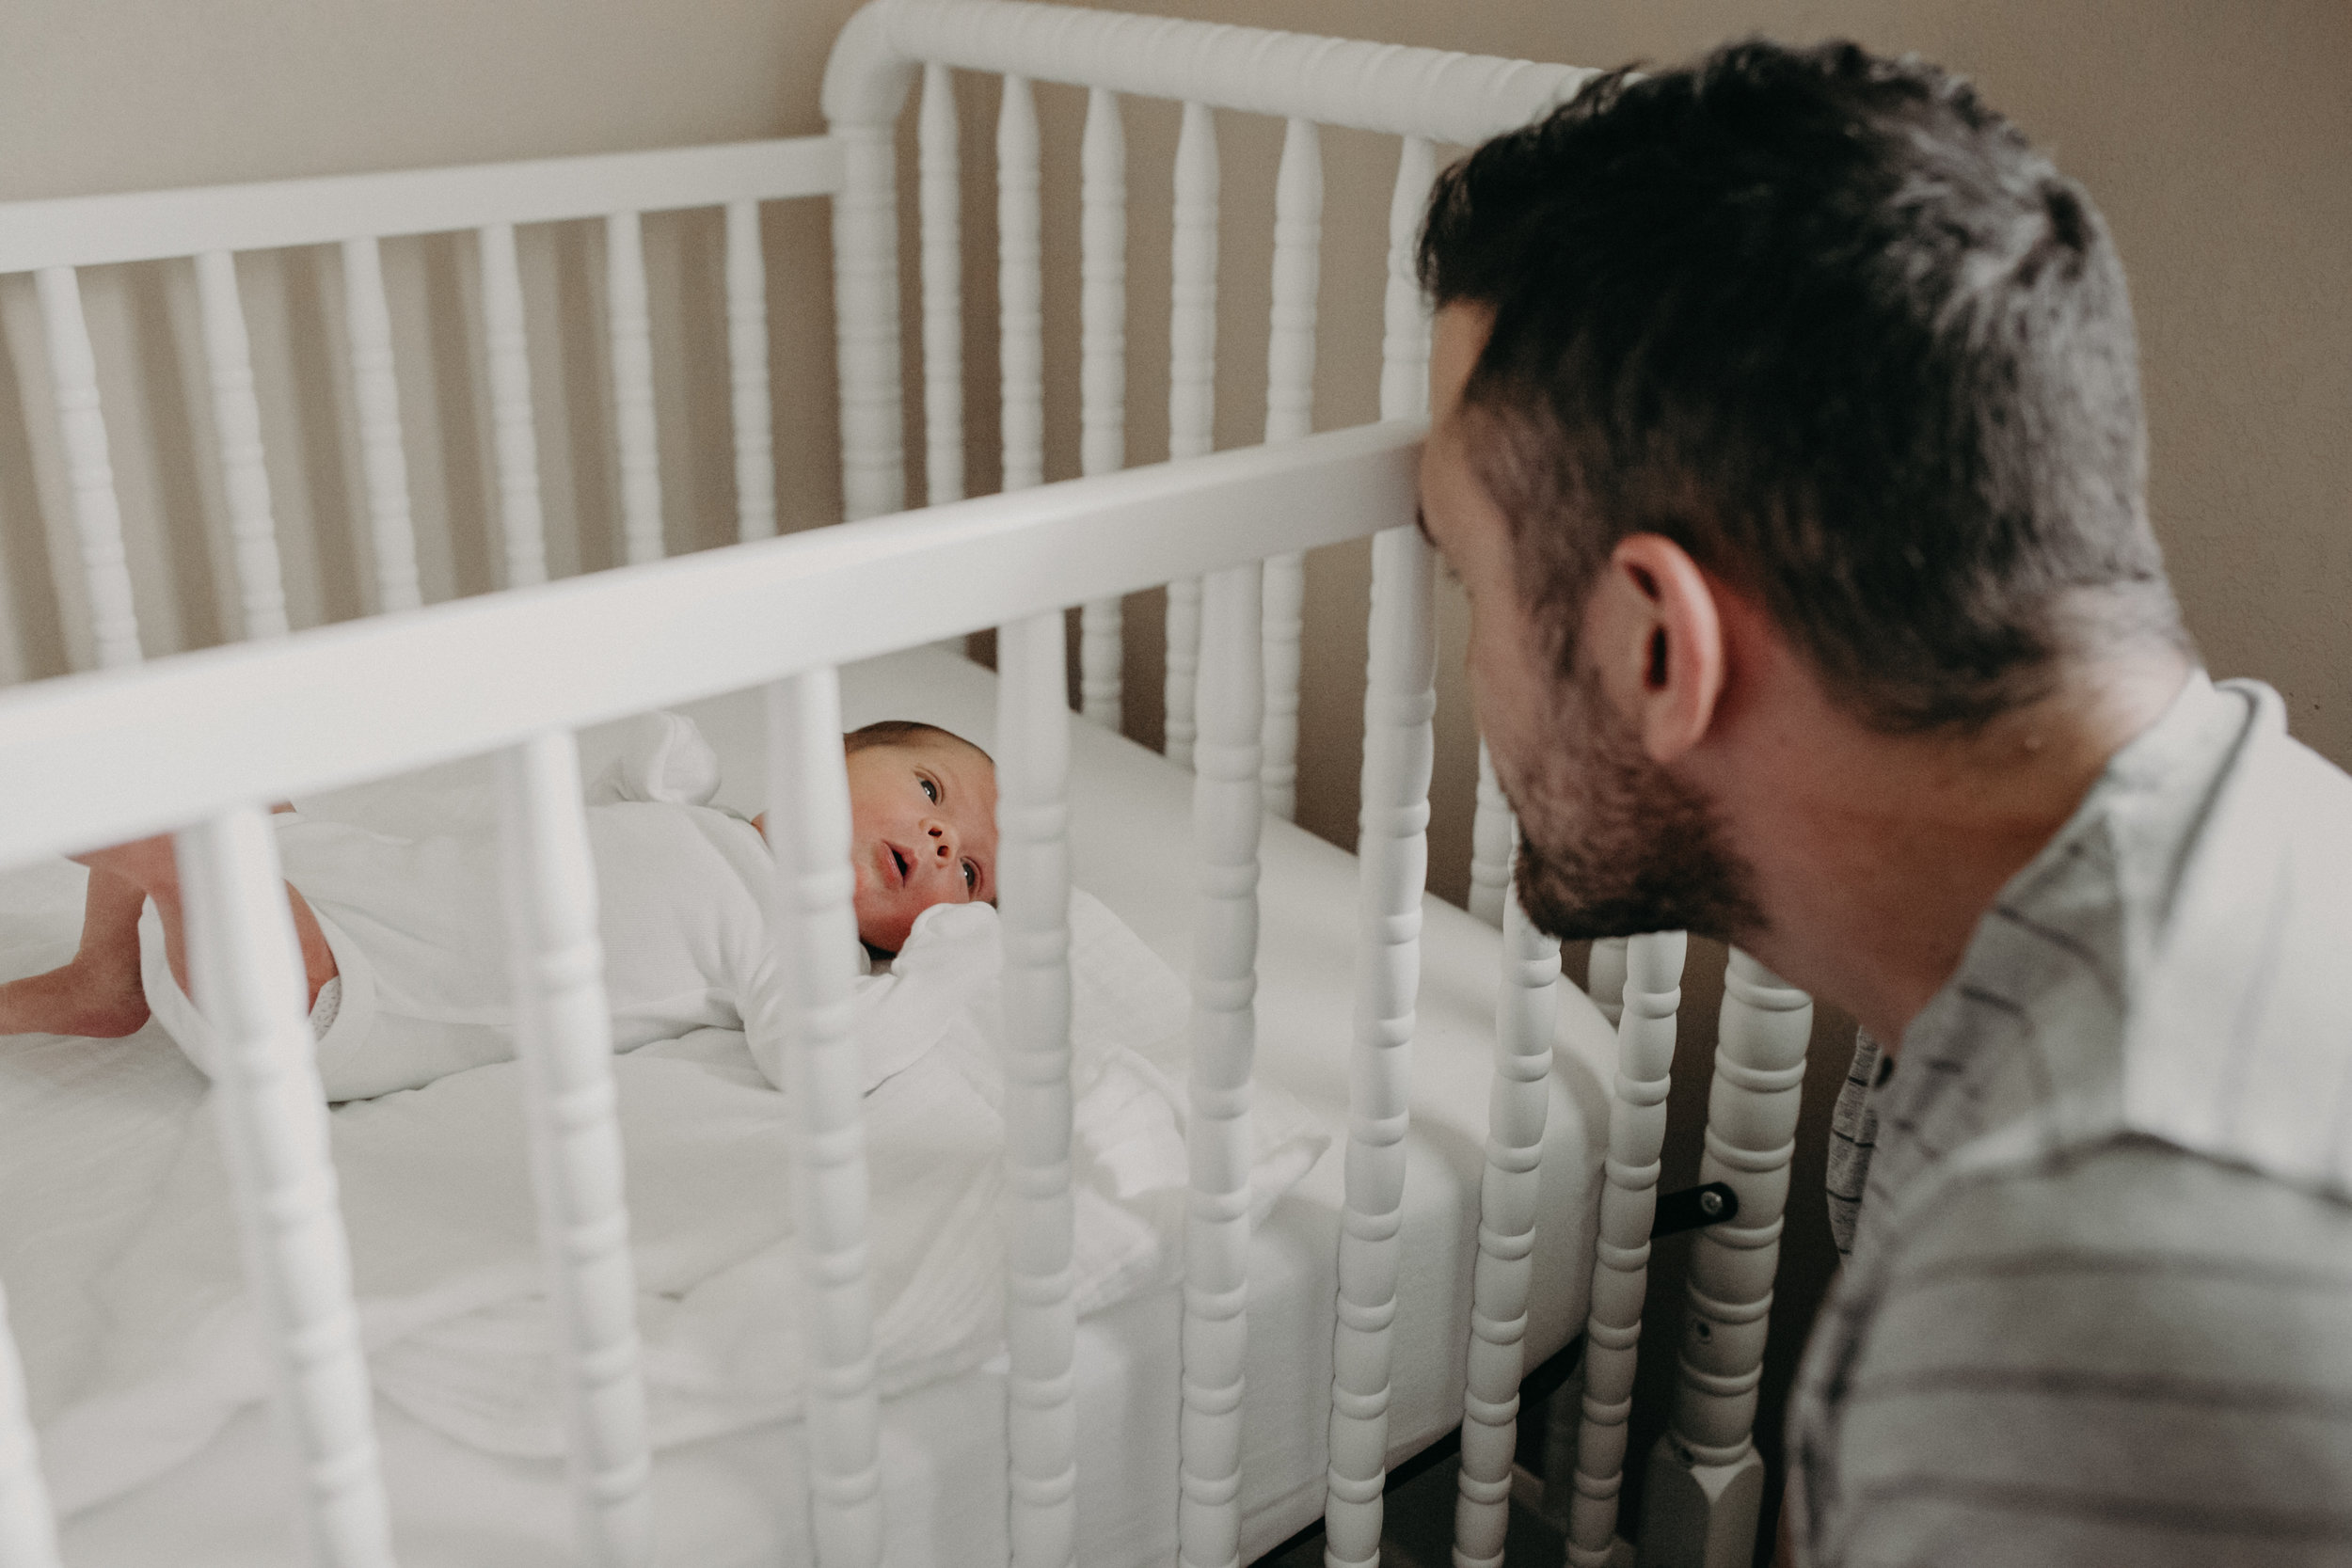  new dad looking at newborn baby in white crib  